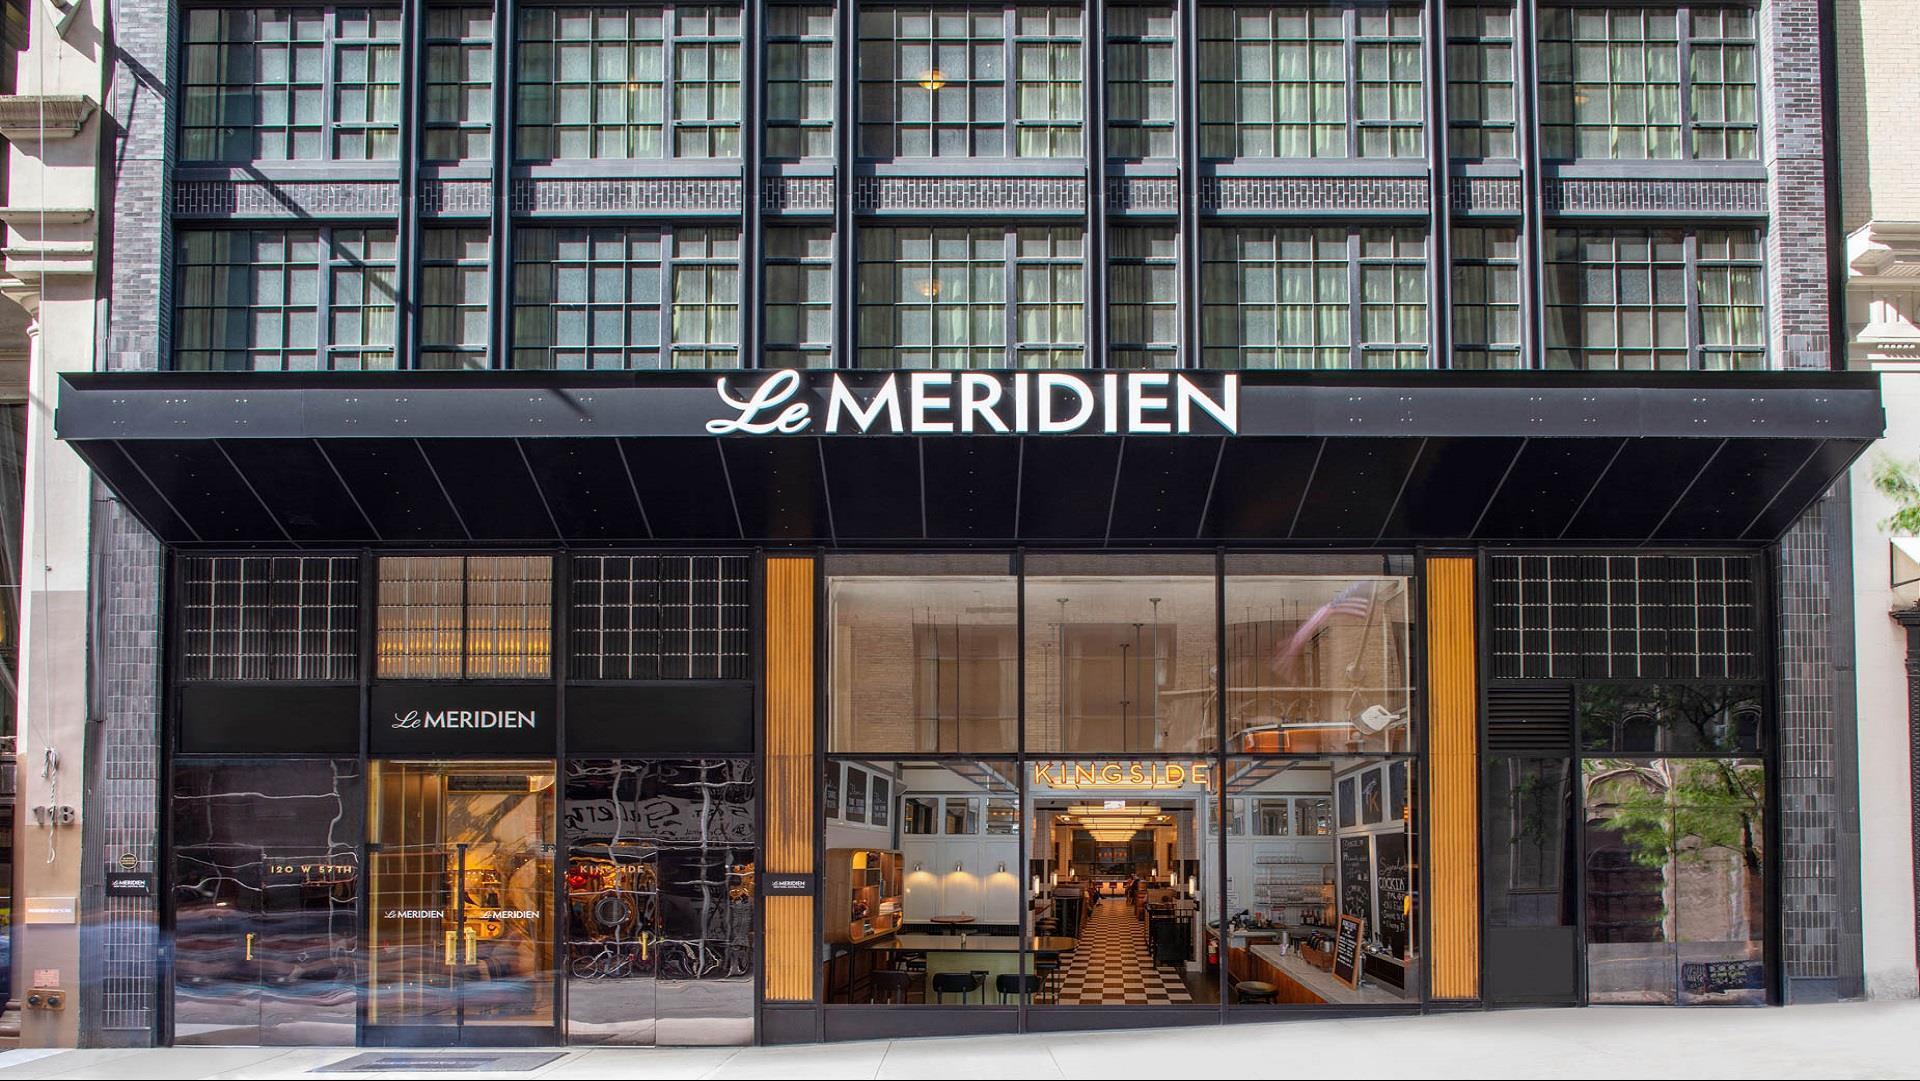 Le Meridien New York, Central Park in New York, NY